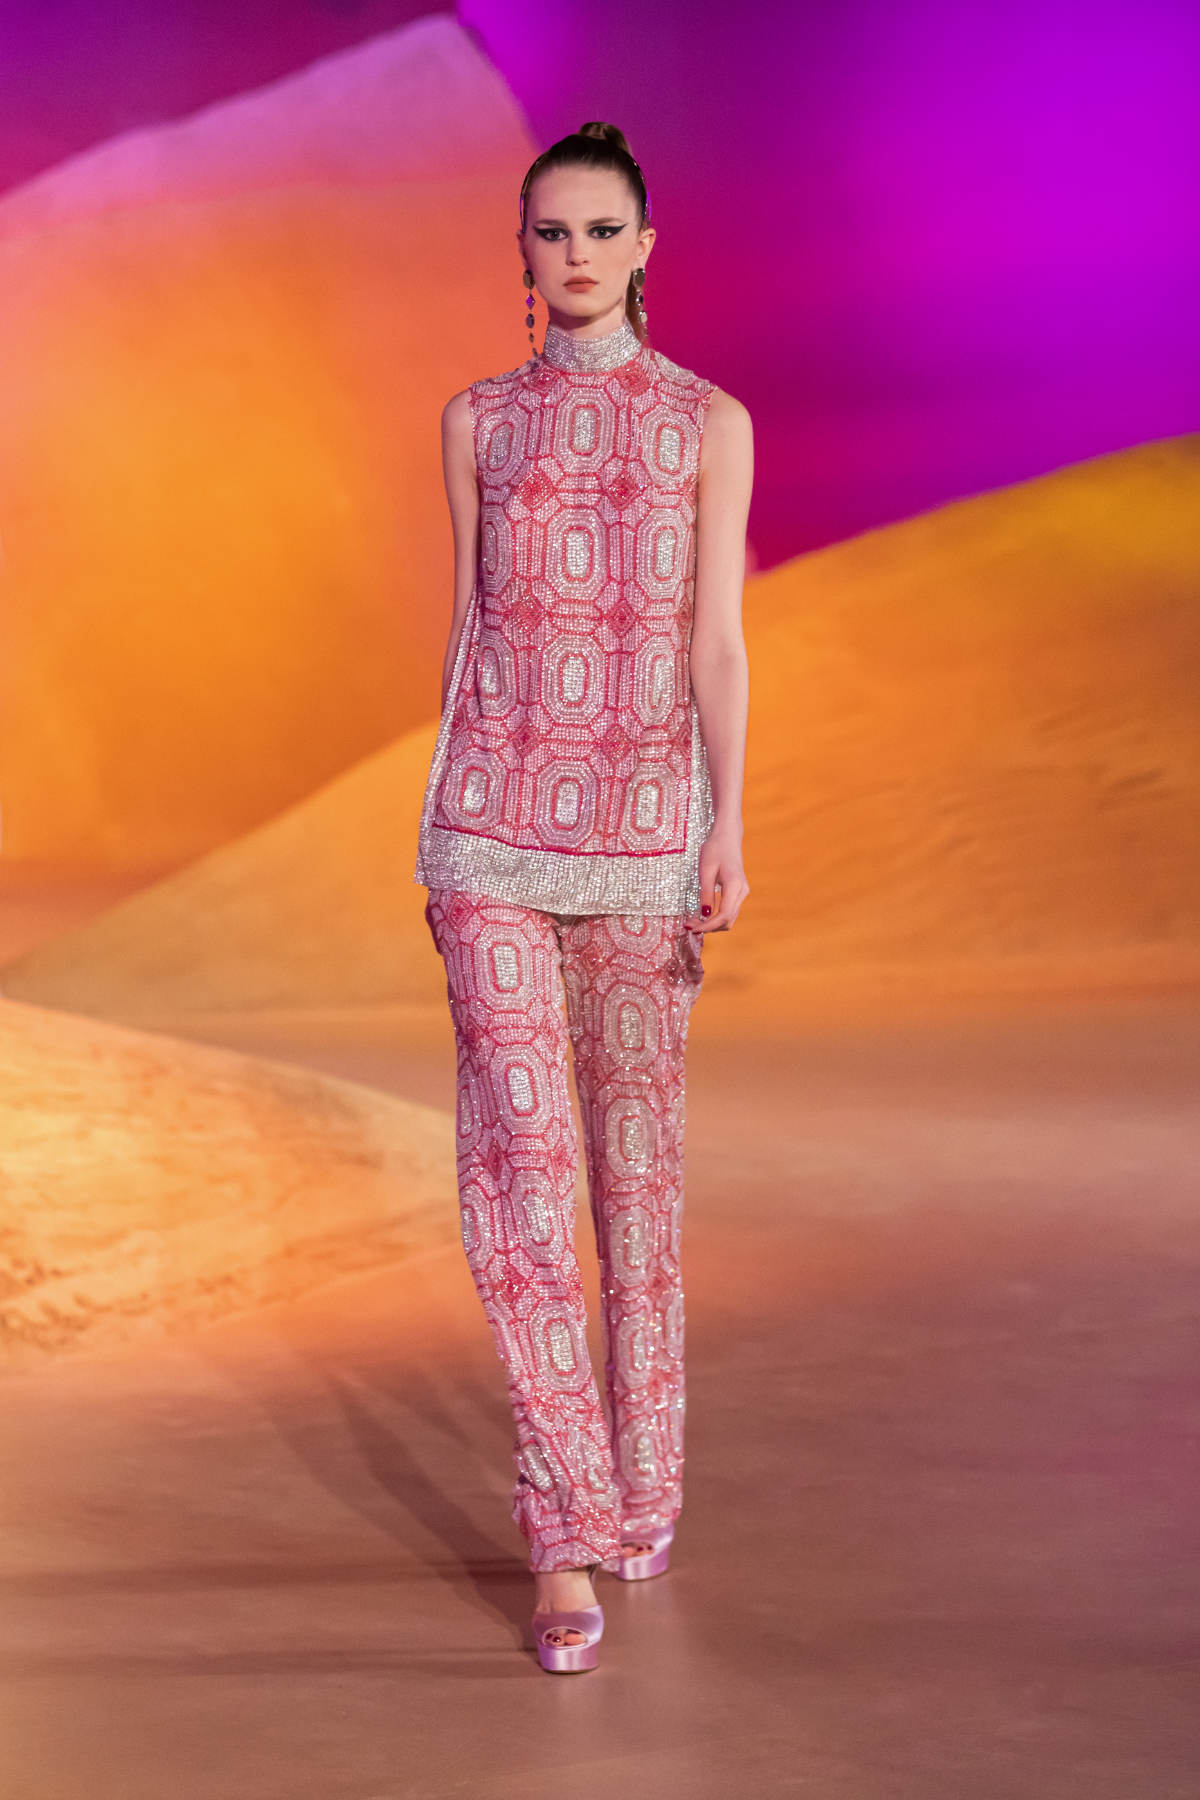 Georges Hobeika Presents Its New Ready To Wear Fall / Winter 2023 Collection: A Martian Breeze